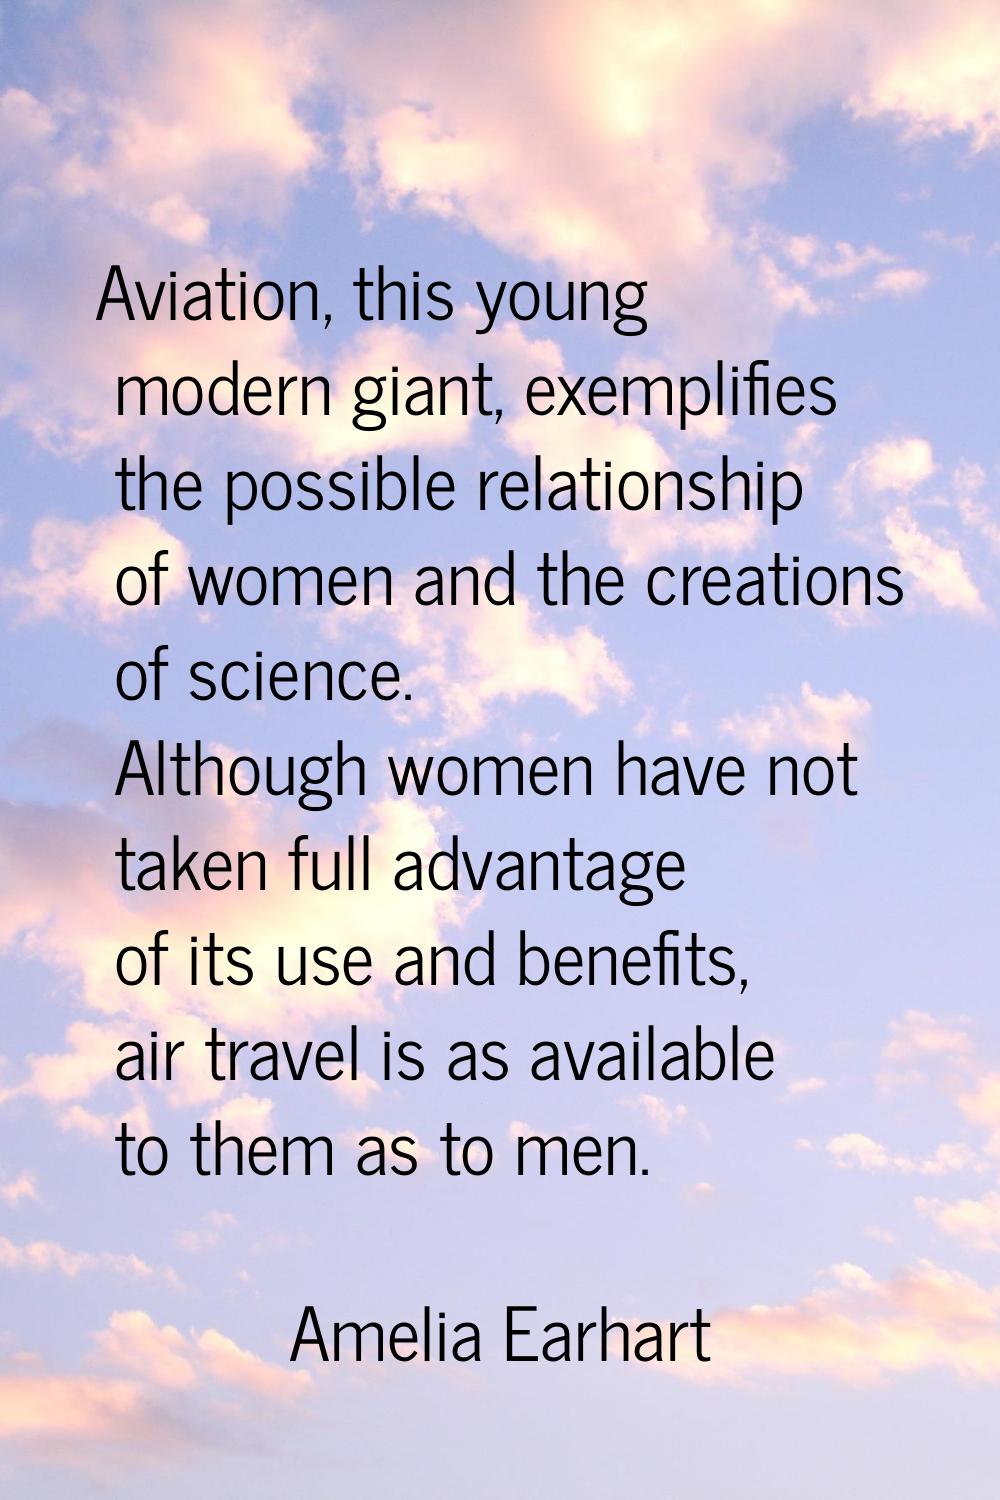 Aviation, this young modern giant, exemplifies the possible relationship of women and the creations